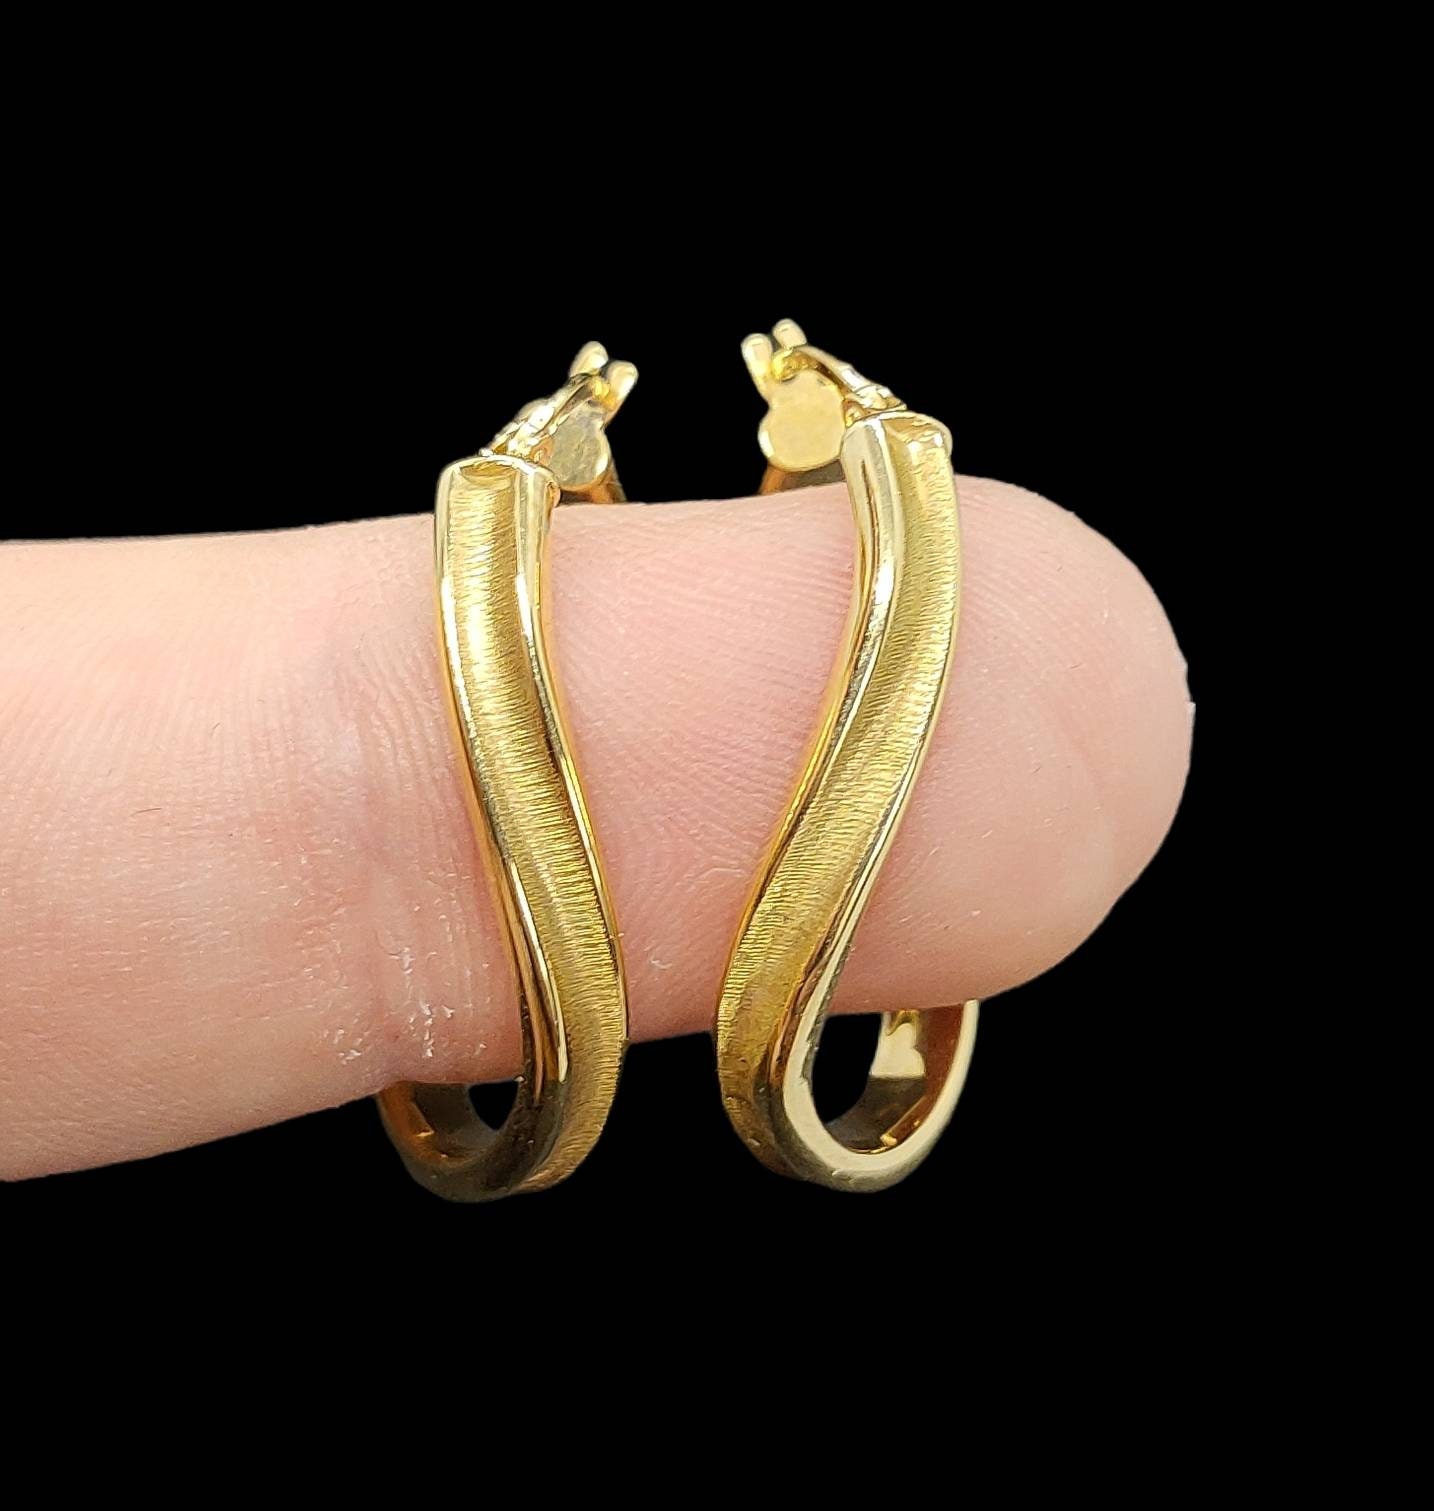 James Moore TH 9ct Yellow Gold Creole Hoop Earrings ER475 - First Class  Watches™ USA